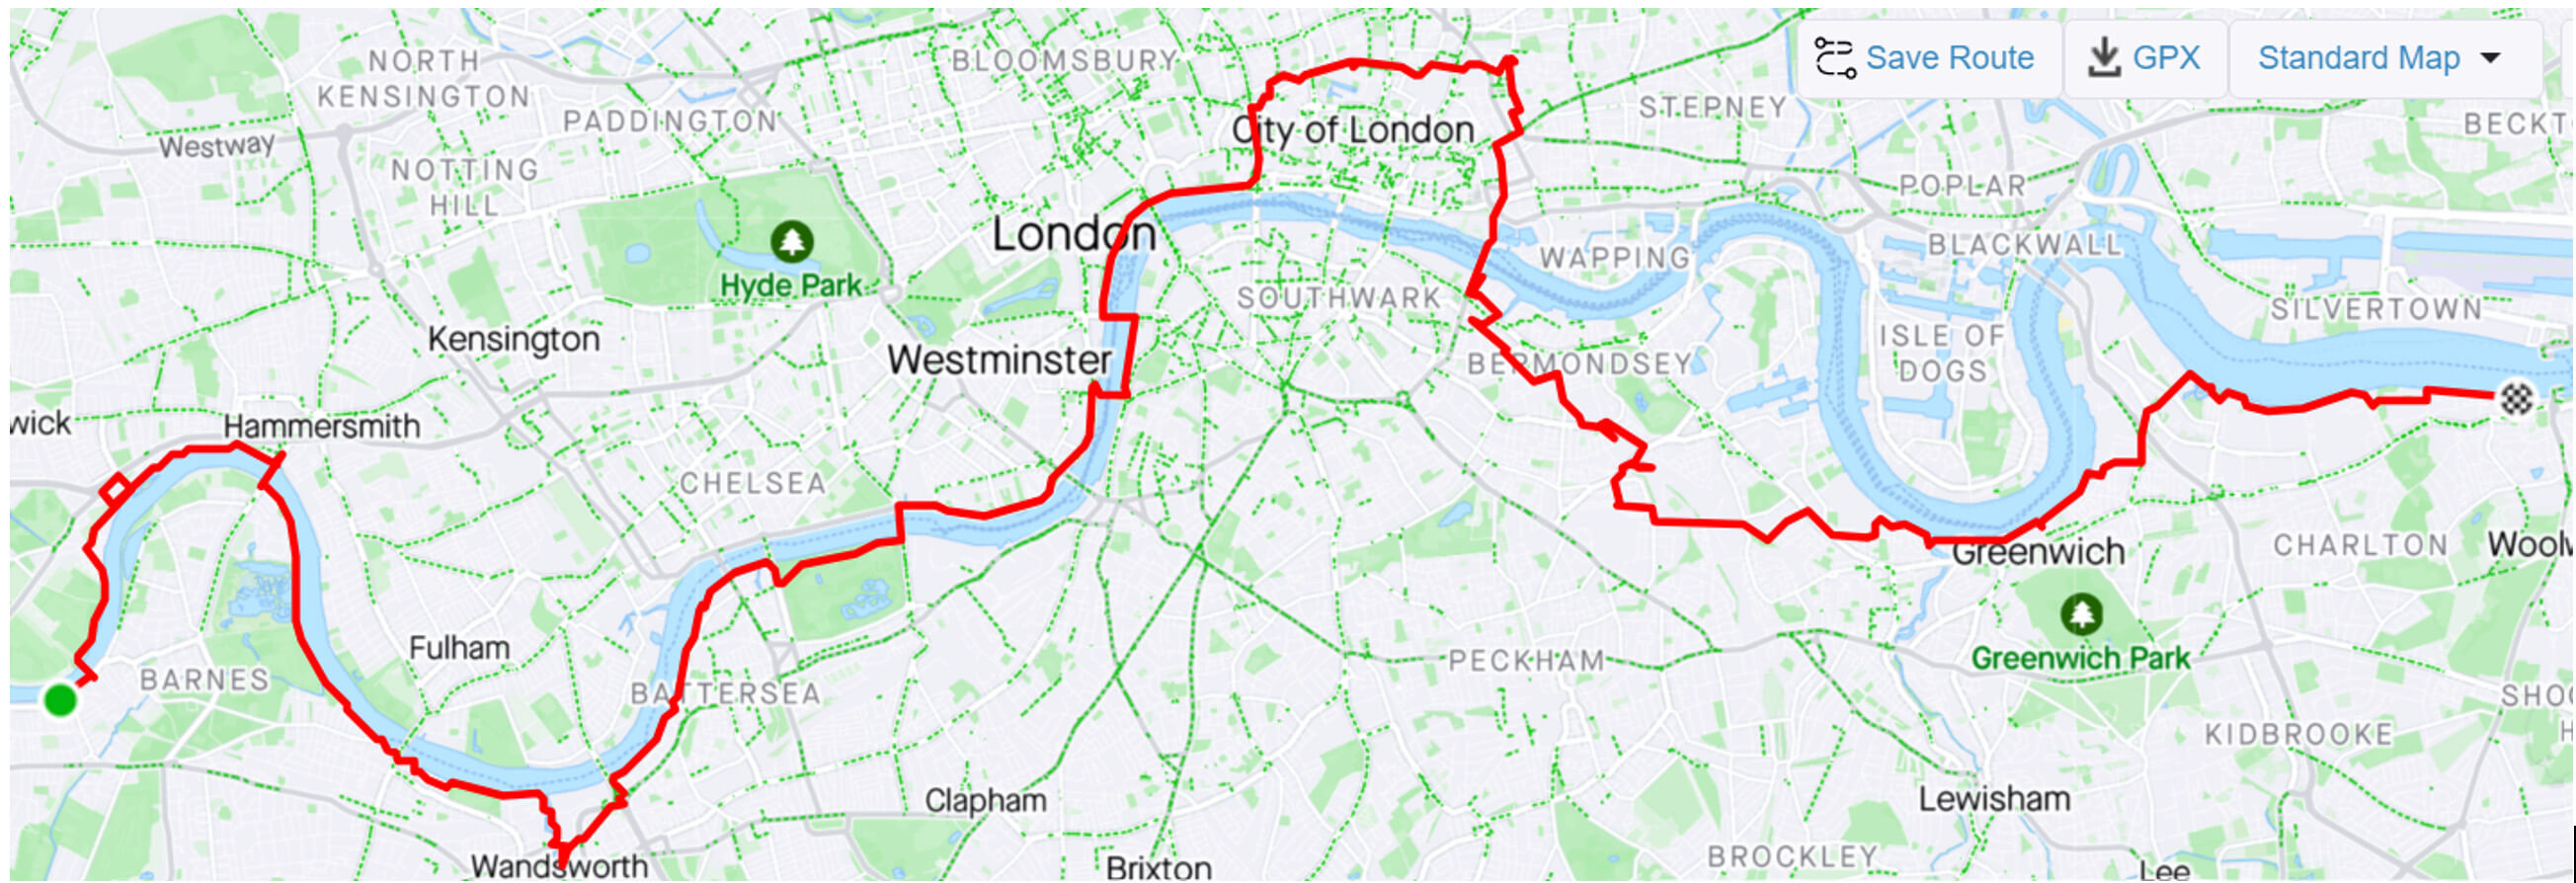 27-Mile Cycle Route. Travelling from East to West